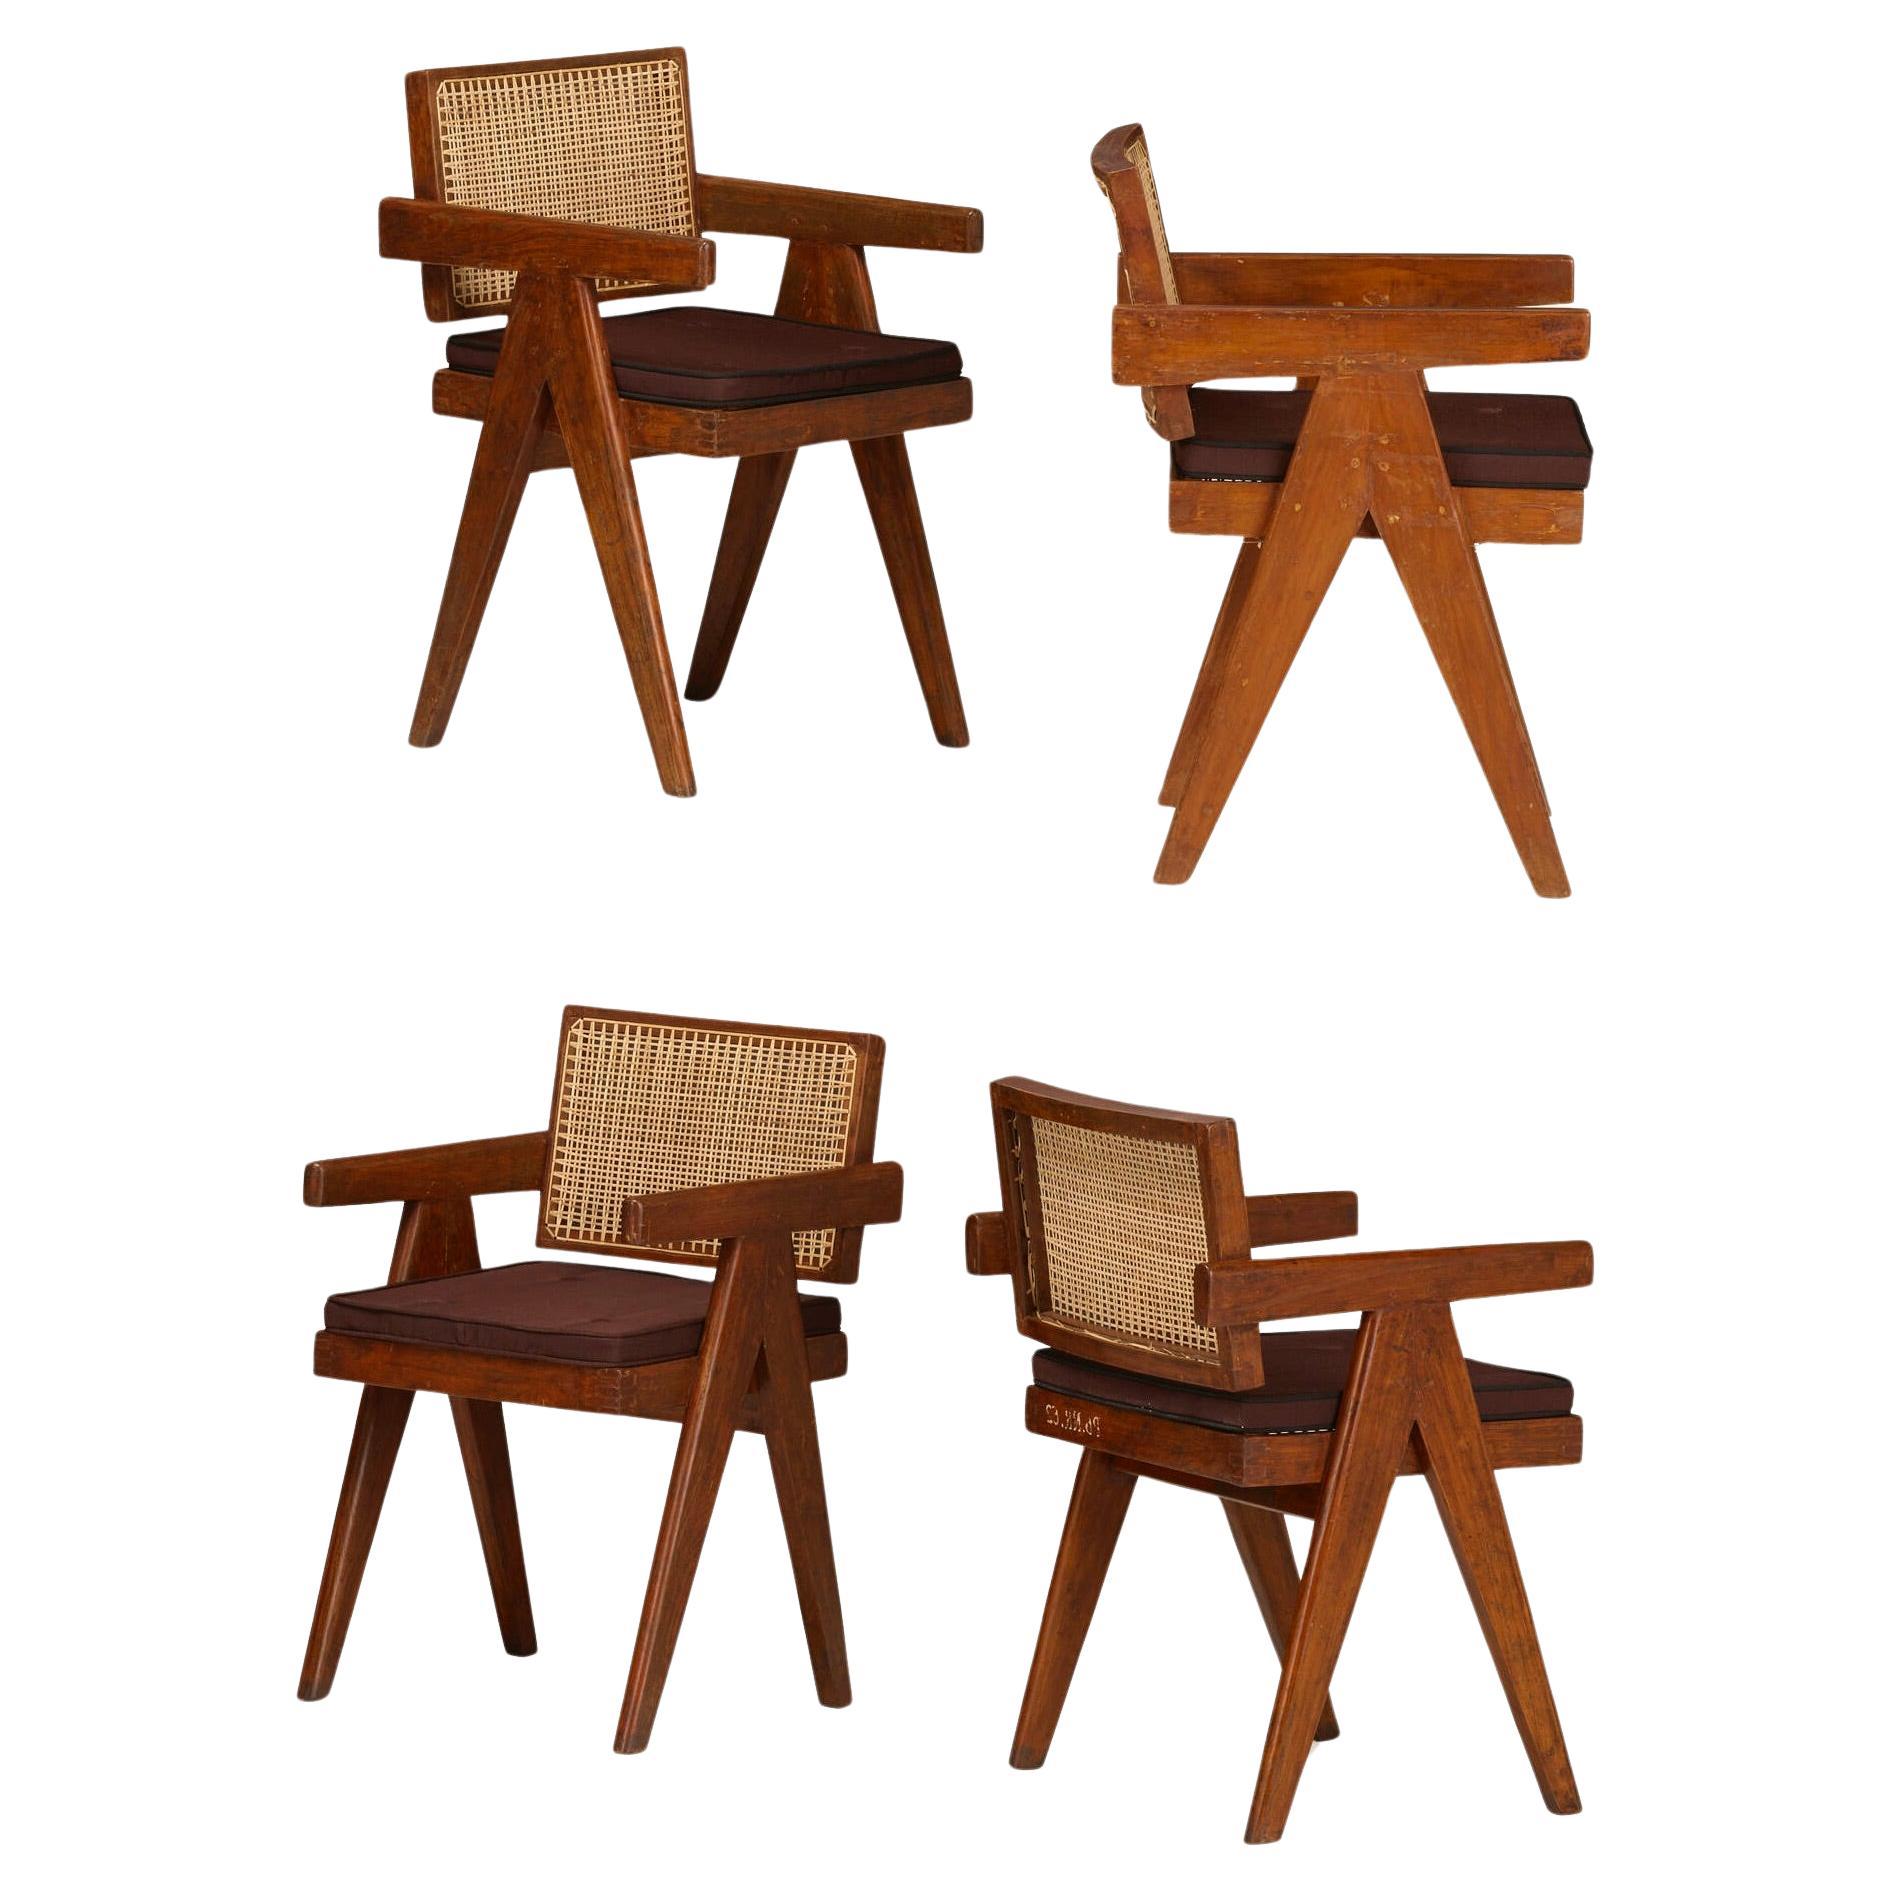 Pierre Jeanneret Set of 8 Office Cane Chairs Ca. 1955-1960 from Chandigarh For Sale 7